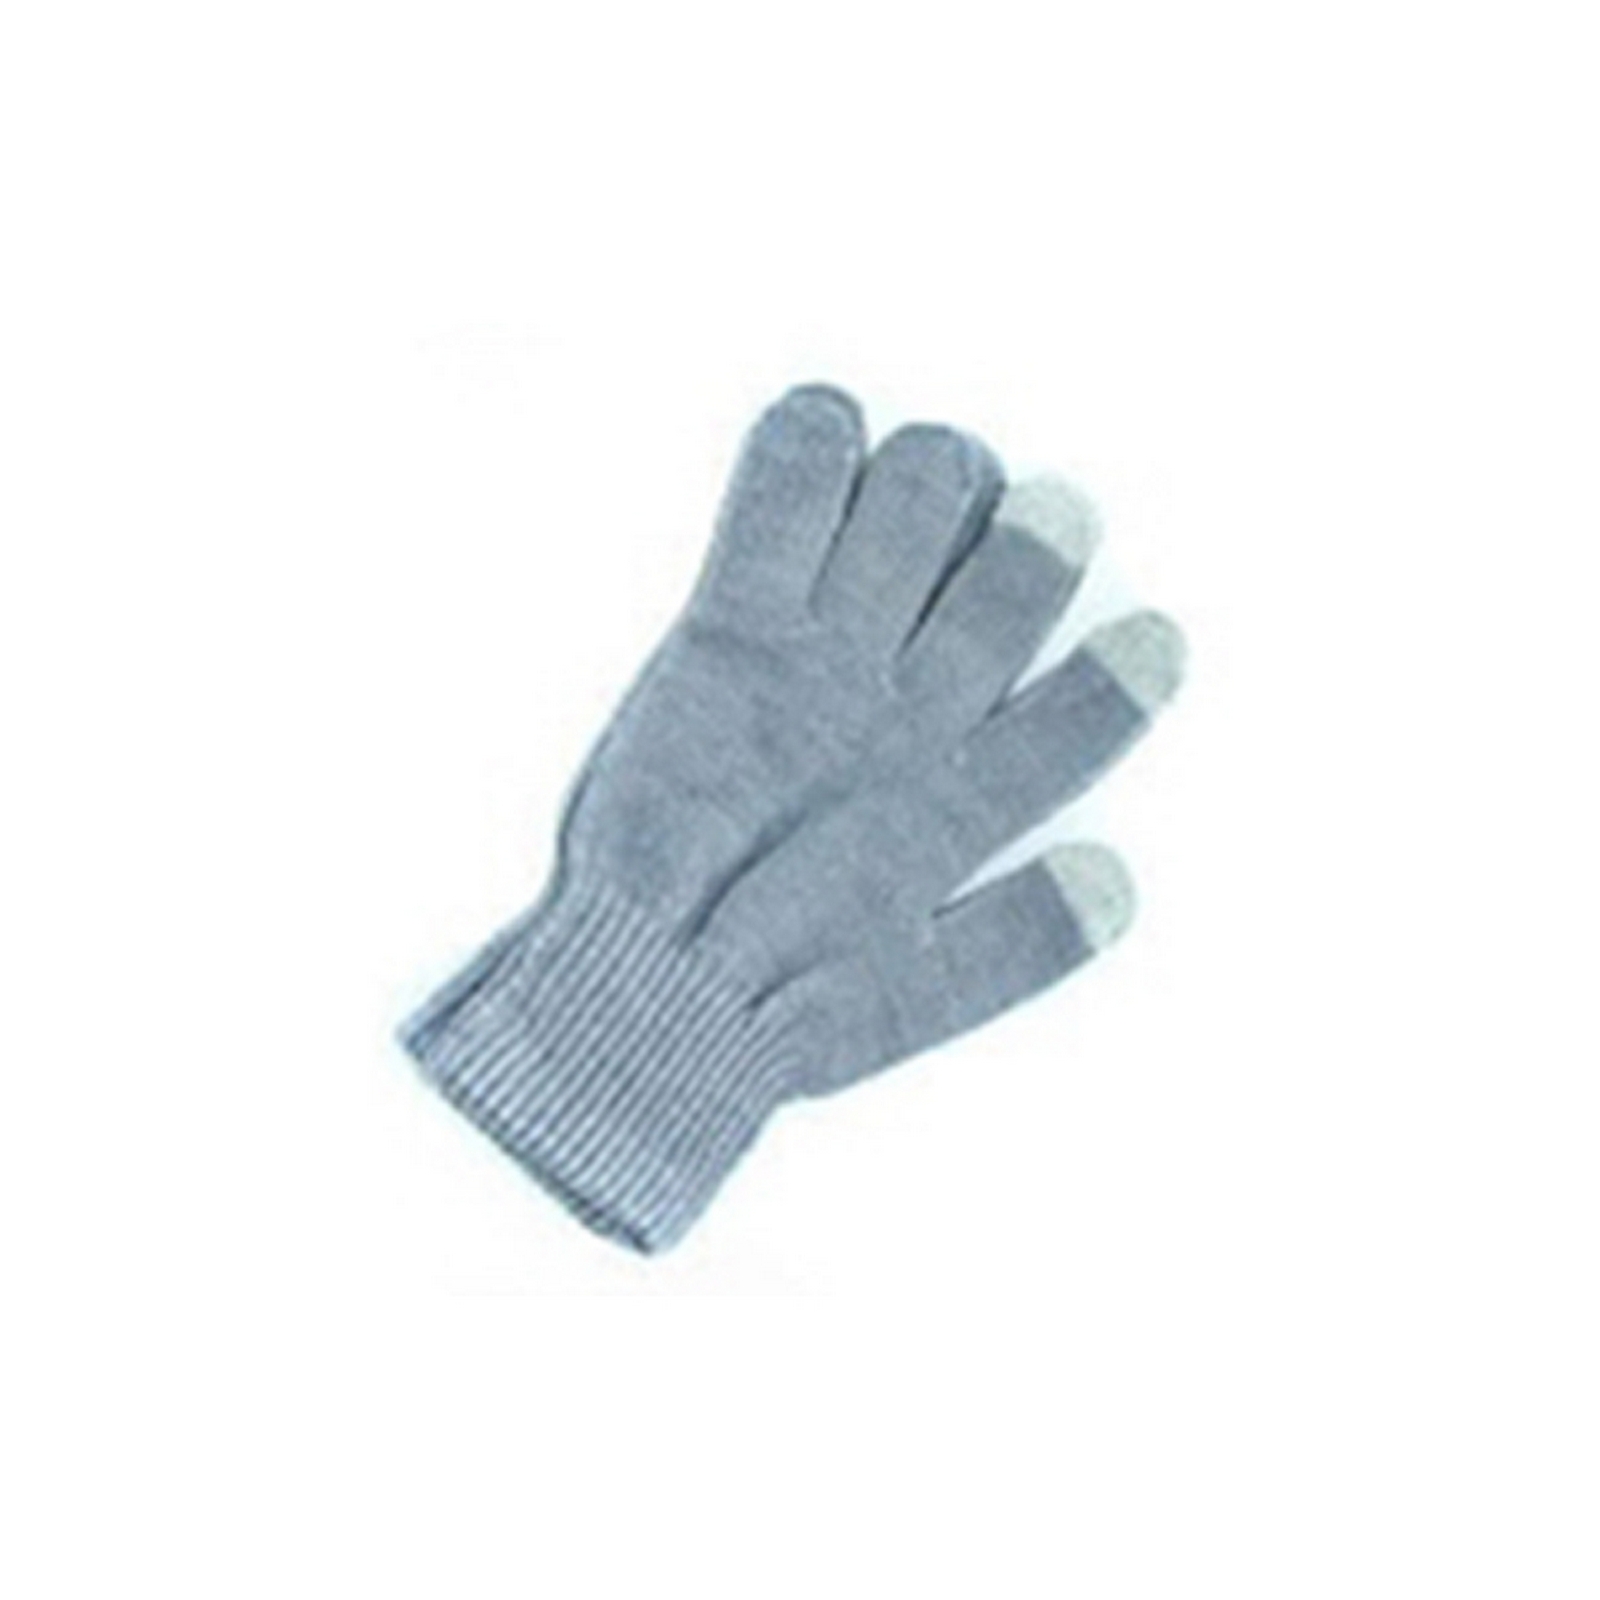 Texting Gloves